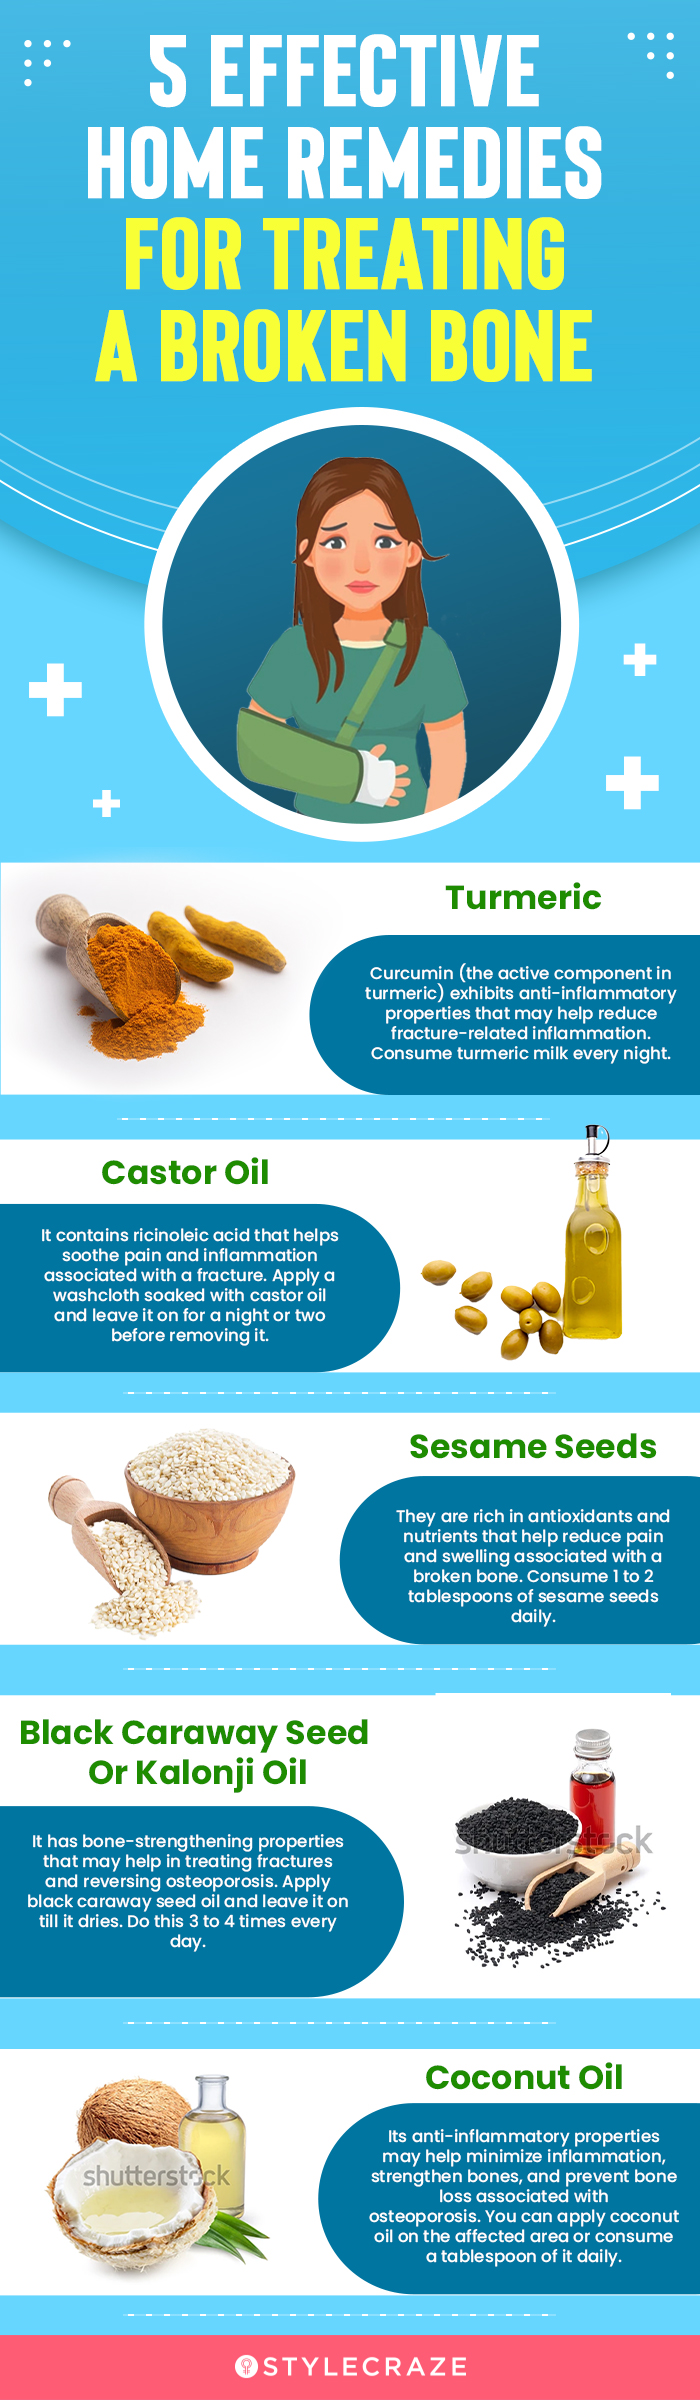 remedies for treating a brocken bone (infographic)